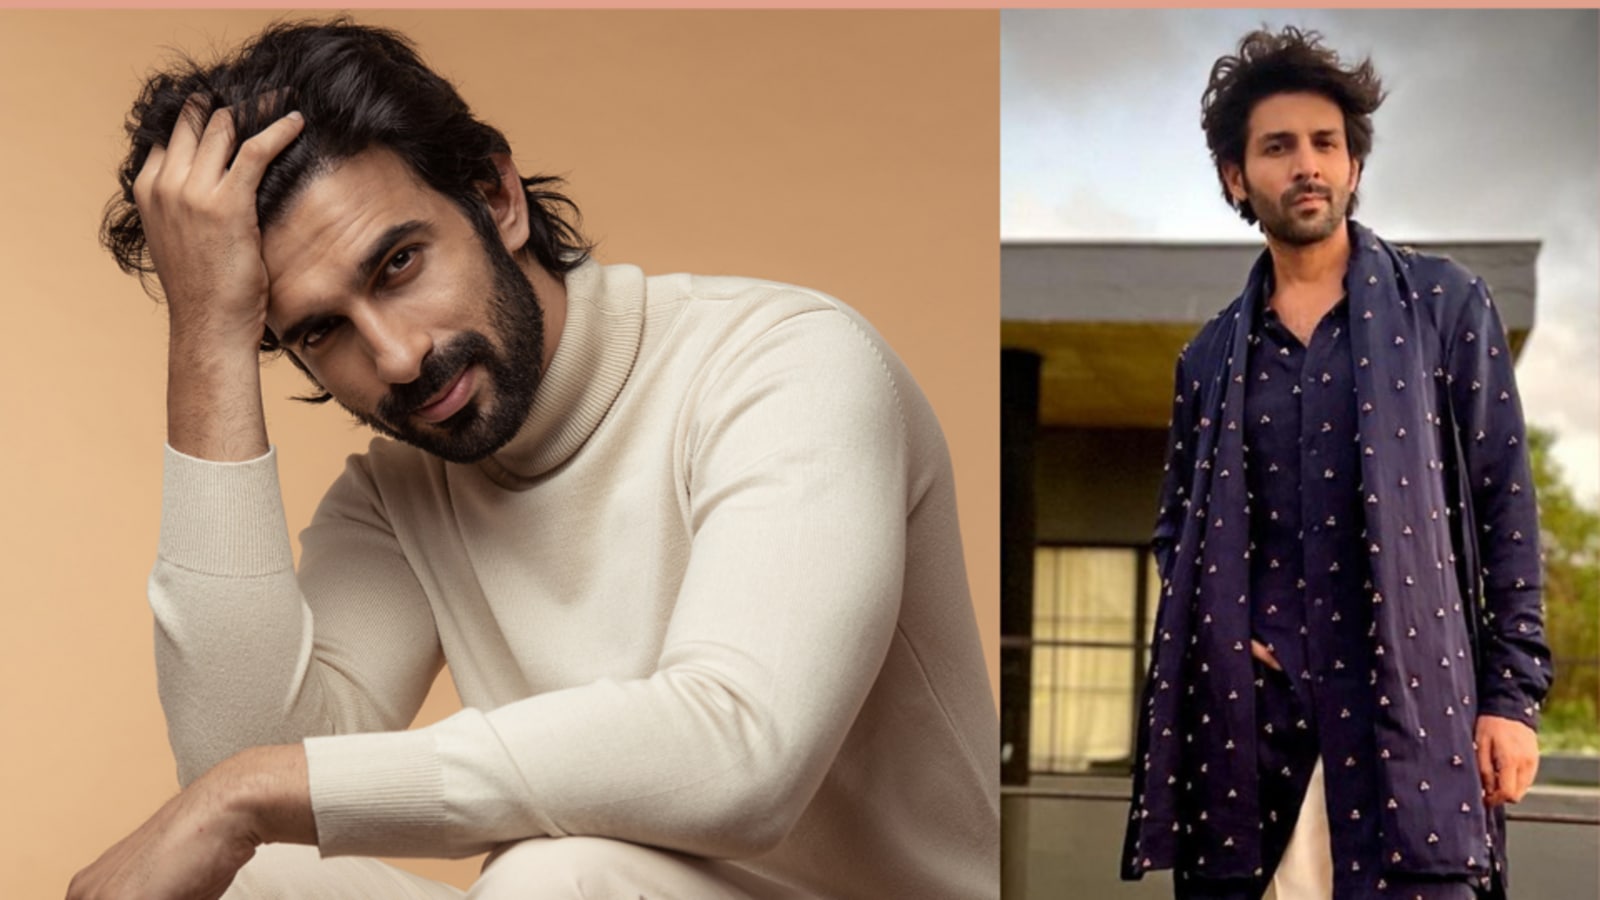 Ankit Siwach recalls auditioning Kartik Aaryan: He used to guide and motivate me a lot